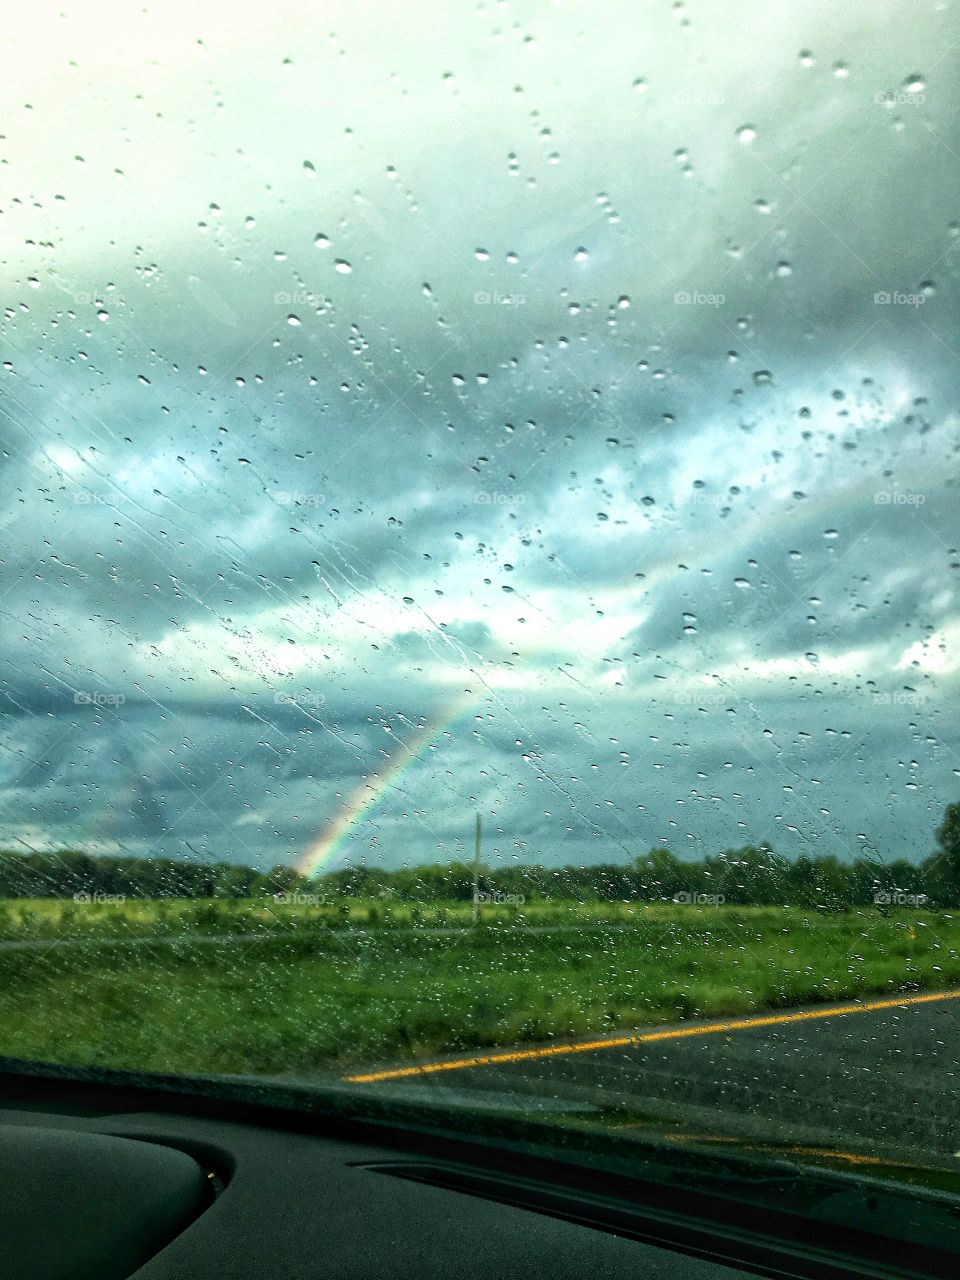 Car rides wouldn’t be as enjoyable without storms and rainbows 